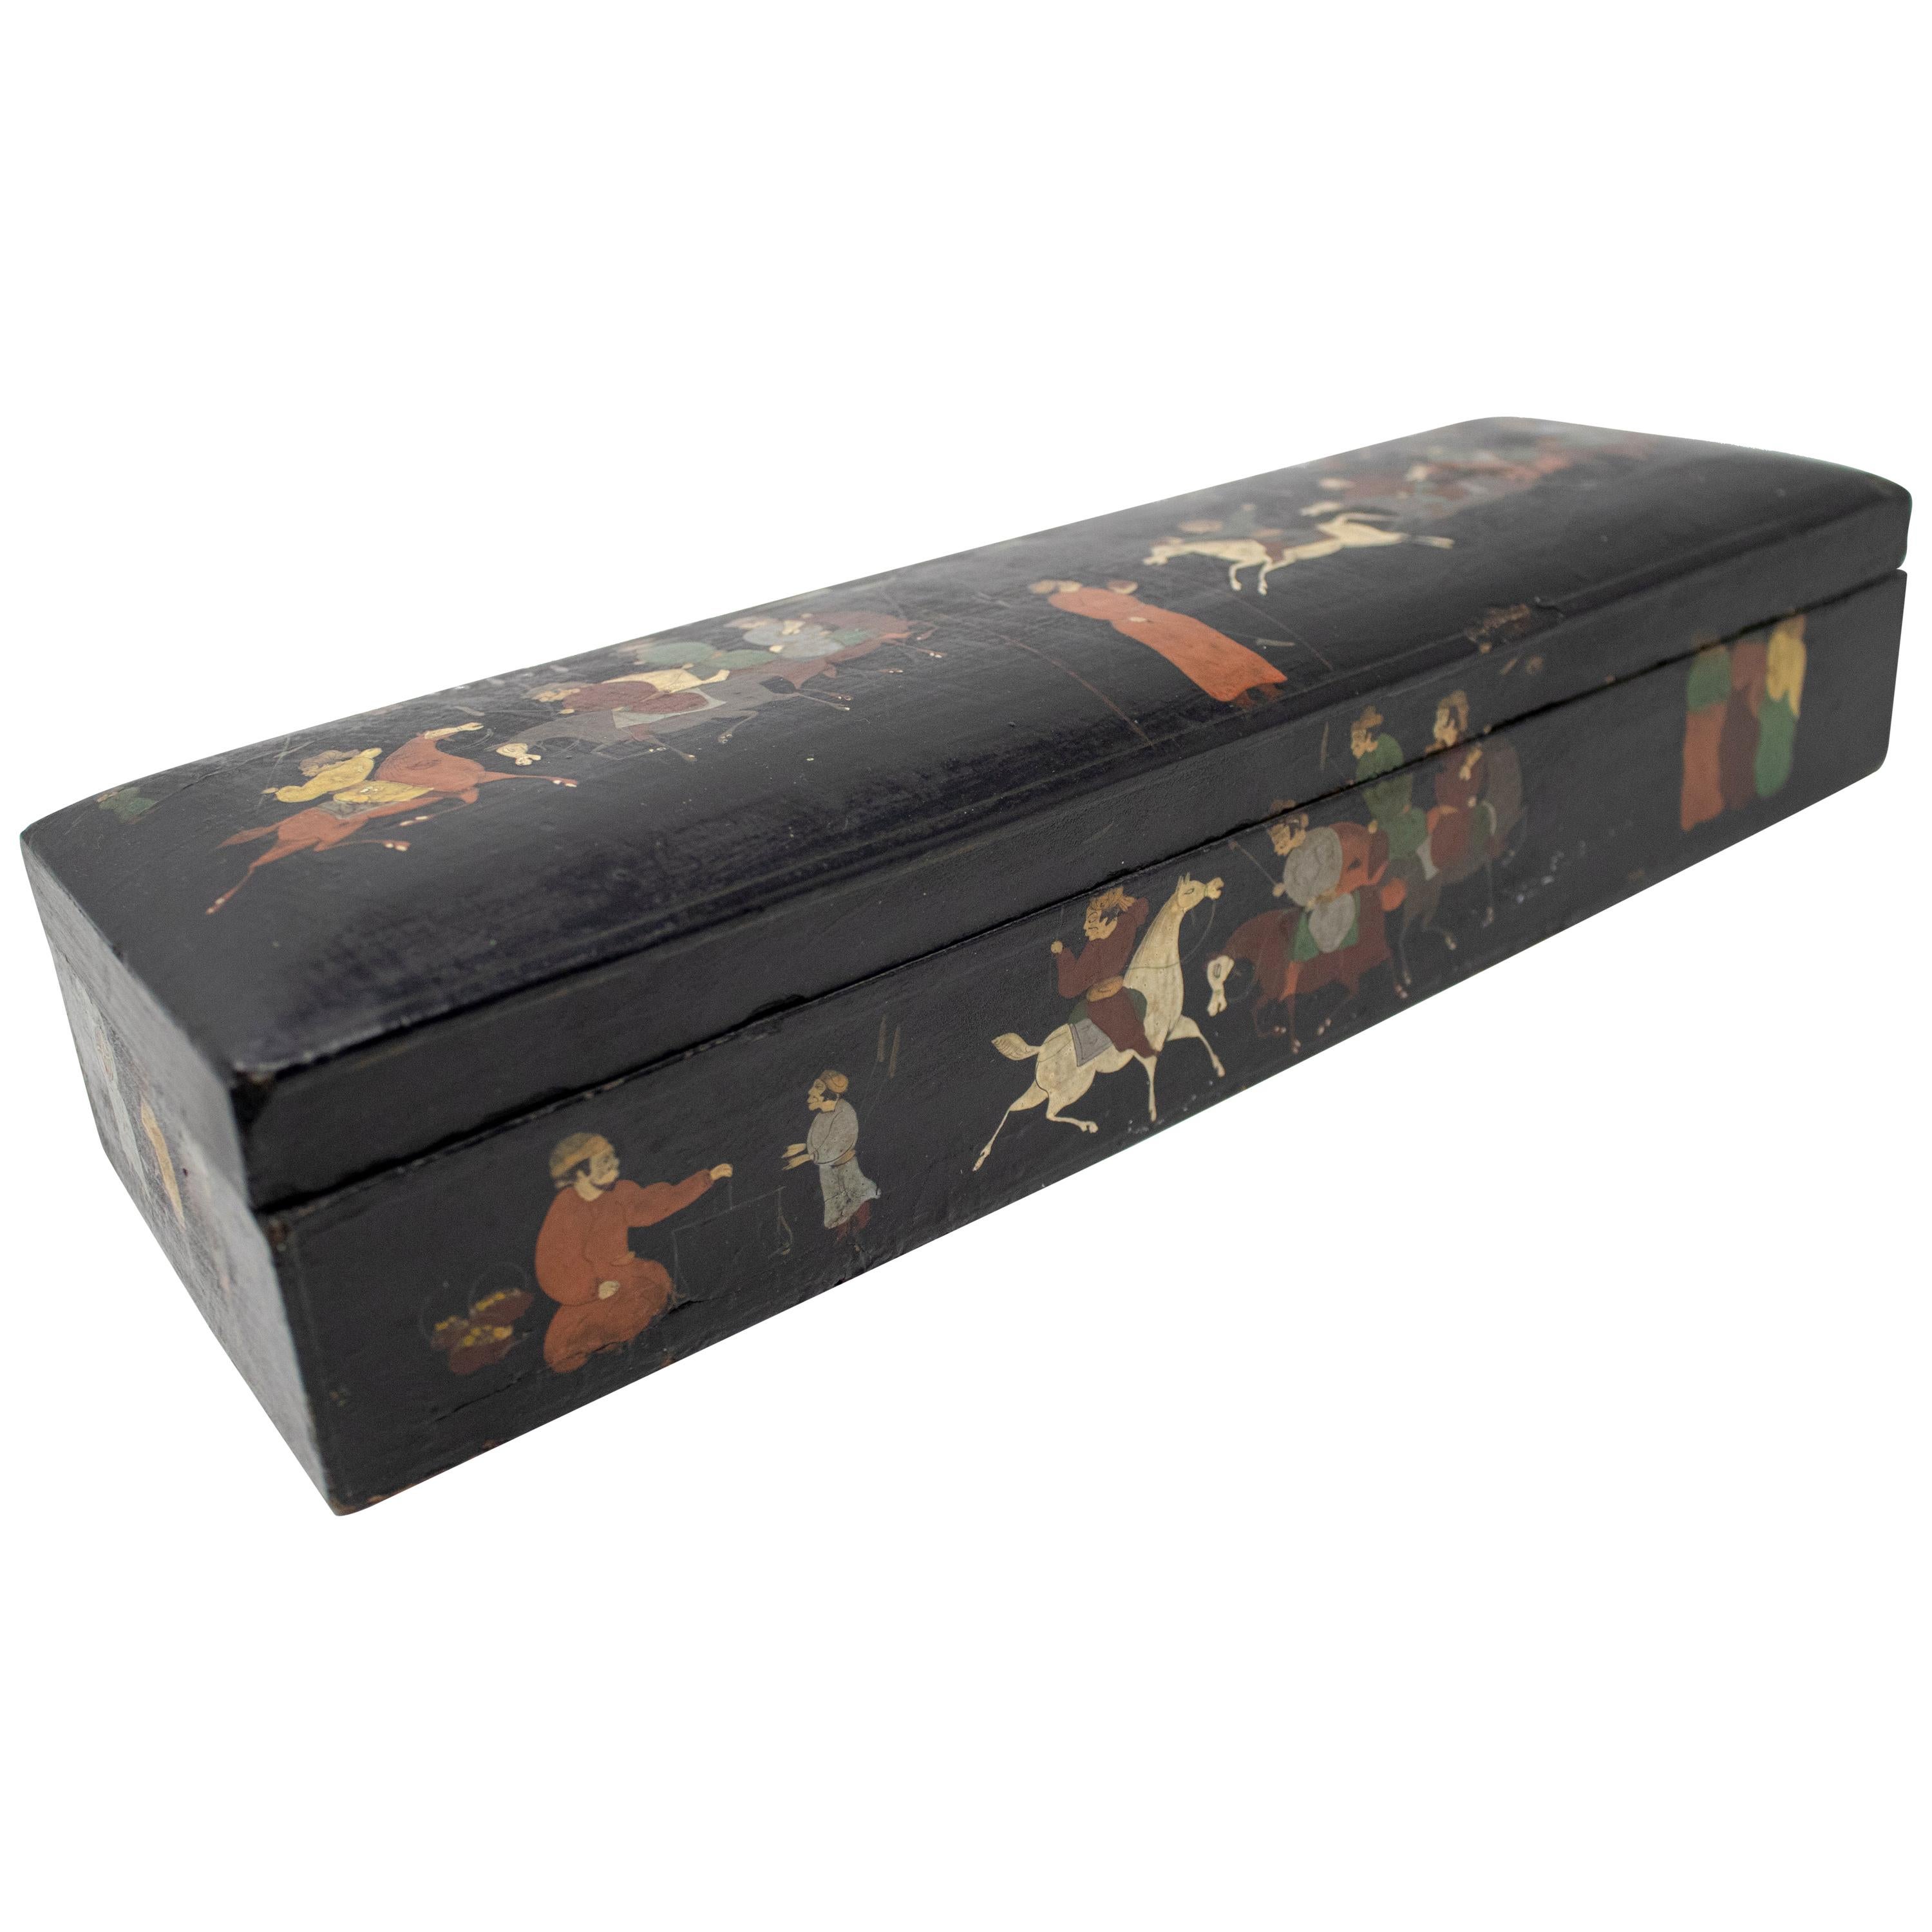 19th Century Indian Mughal Lacquered Box with People and Horses Painted Scenes